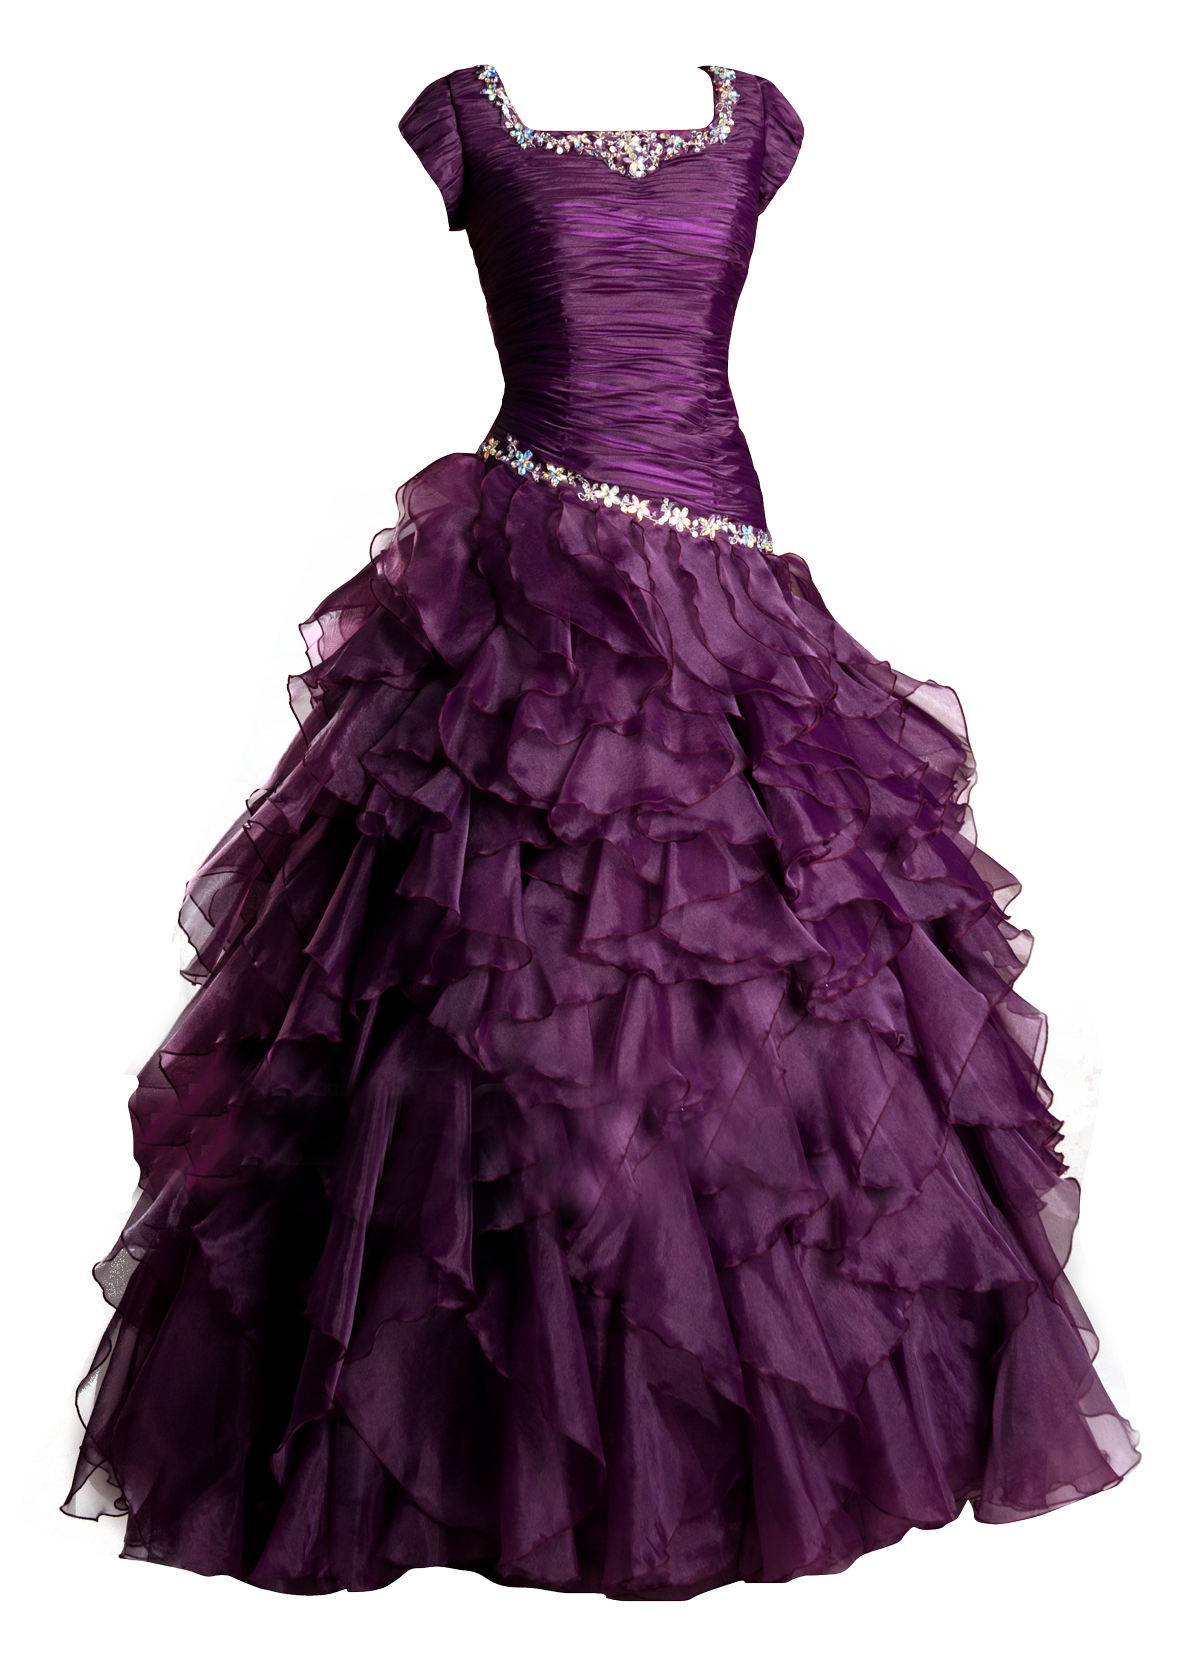 Girl Dress Png Image Purepng Free Transparent Cc0 Png Image Library